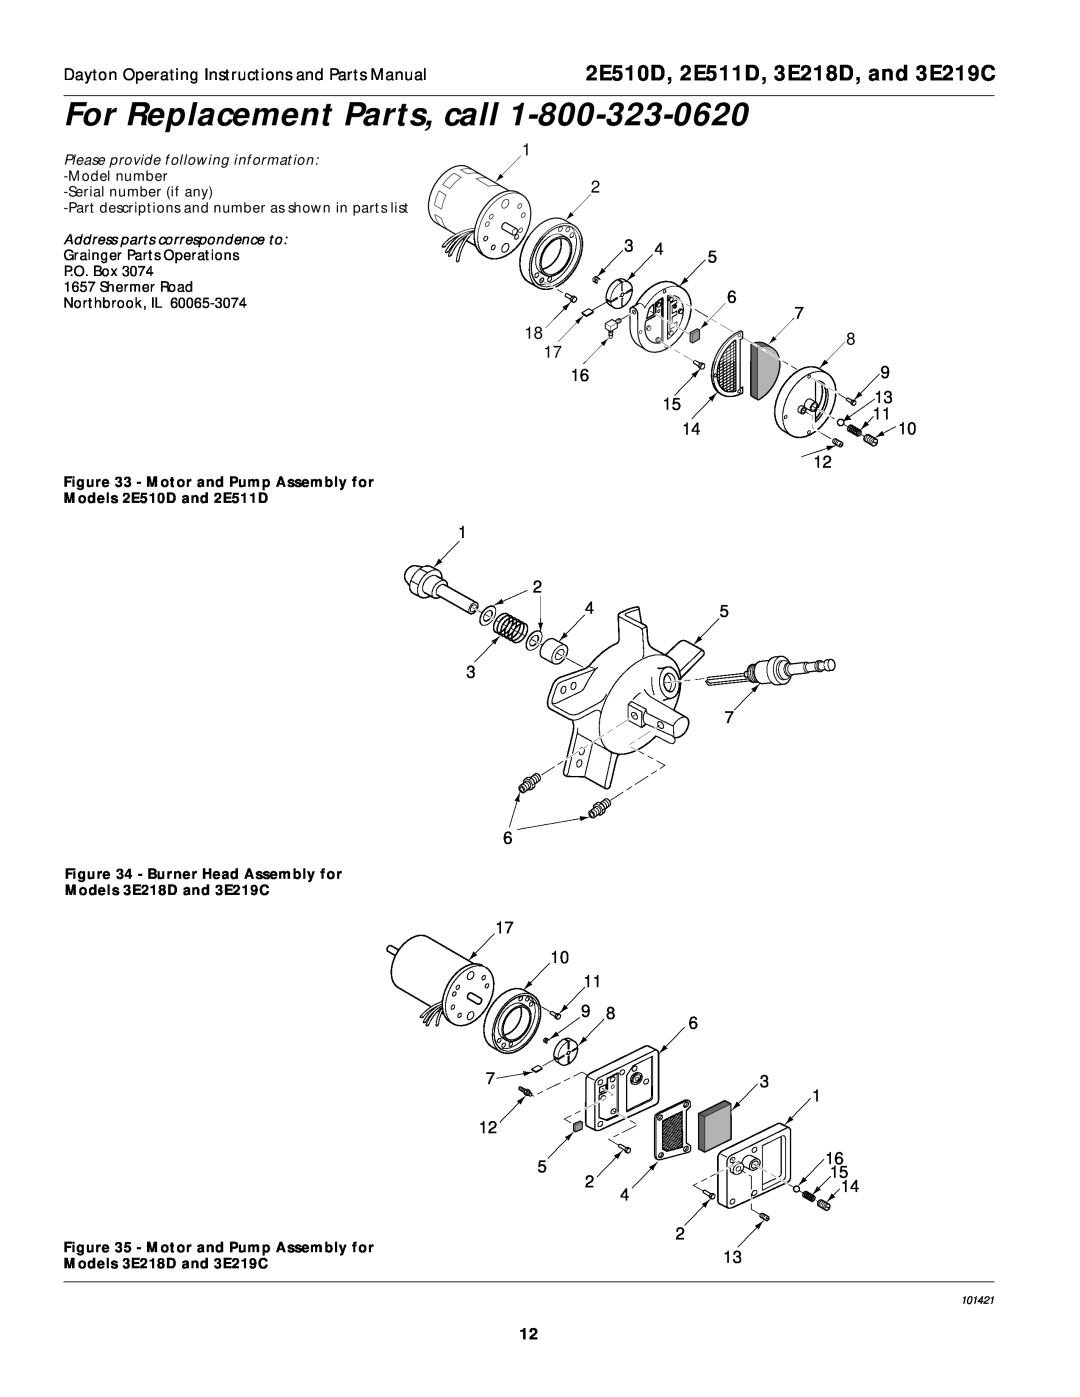 Dayton specifications For Replacement Parts, call, 2E510D, 2E511D, 3E218D, and 3E219C 